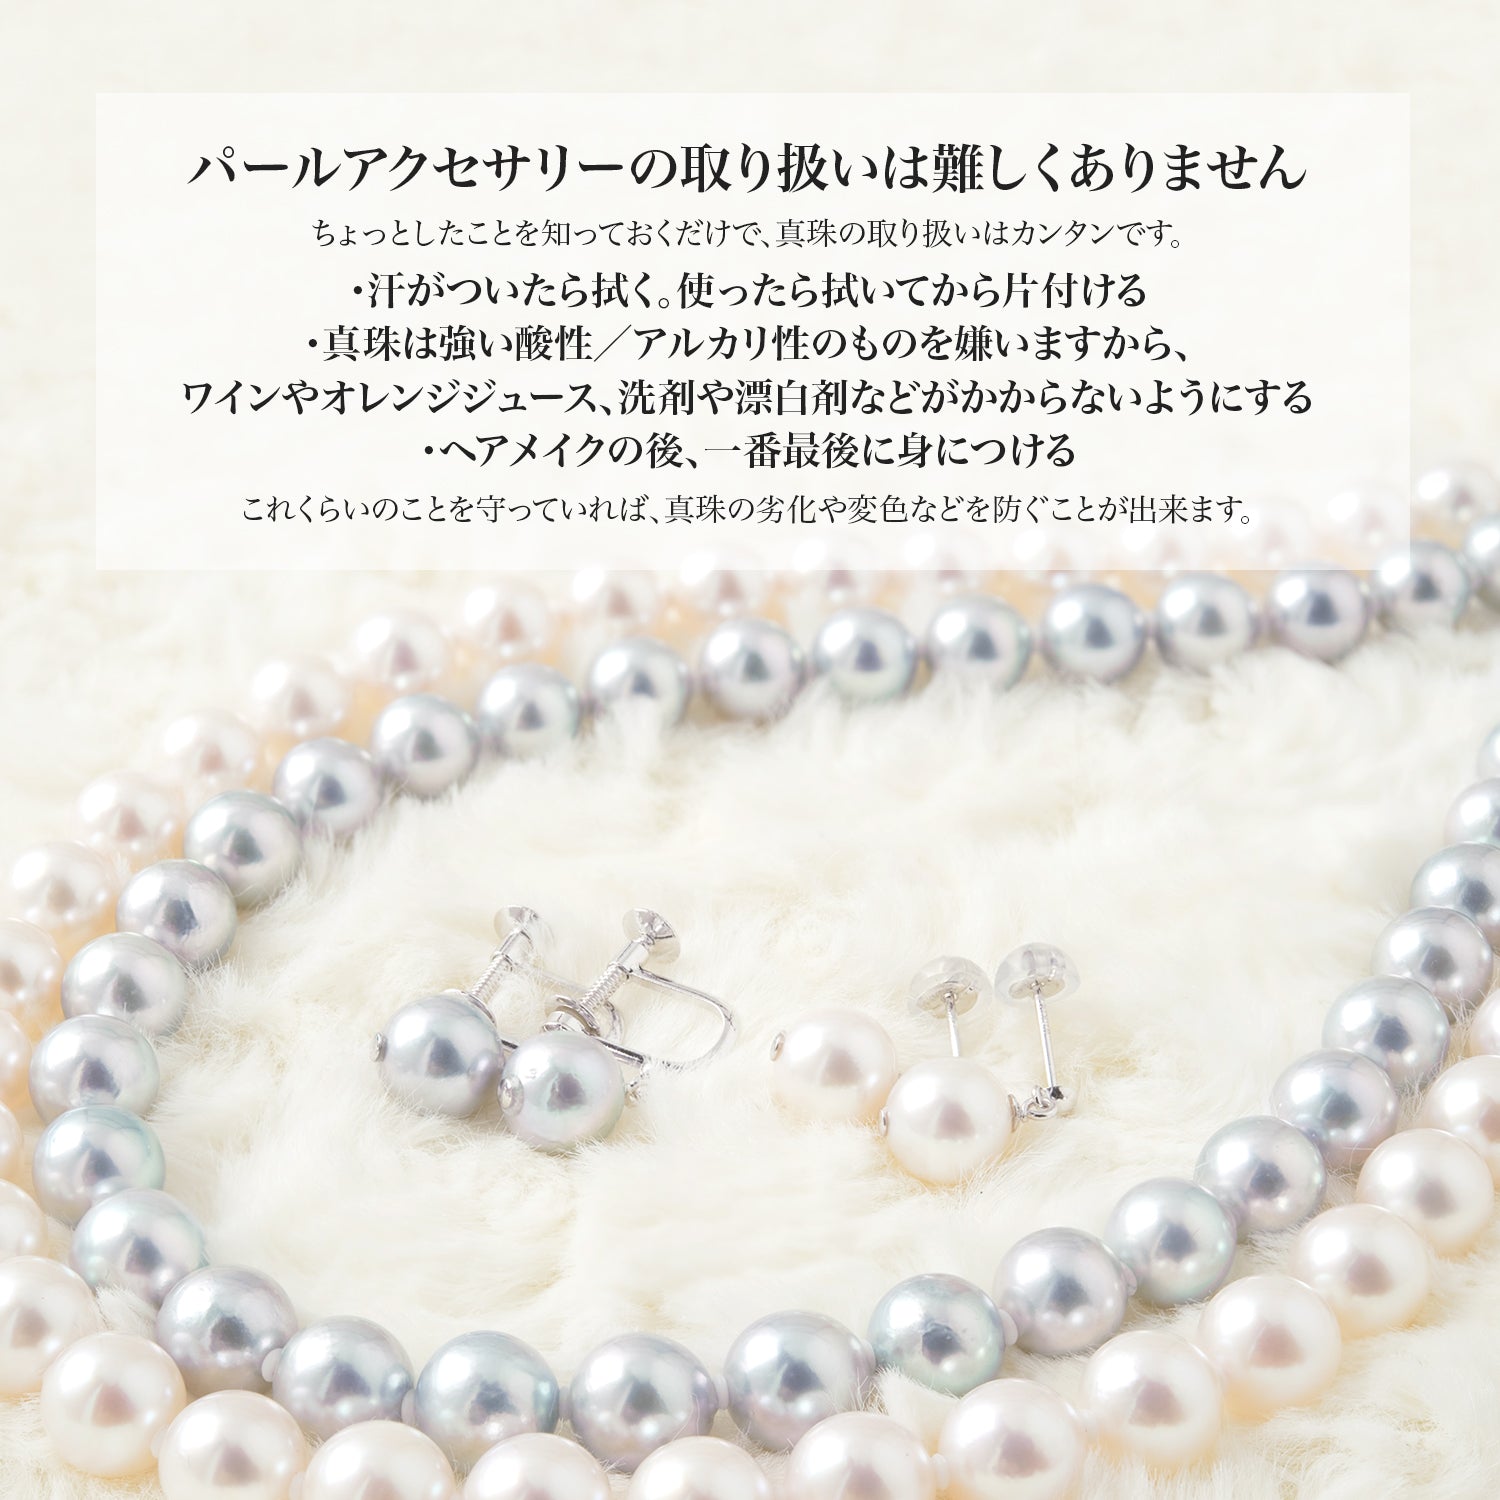 Akoya pearl necklace 1 strand [5.0-5.5mm] SV925 Adjuster included, Certificate of authenticity included, Cardboard case included (4030)